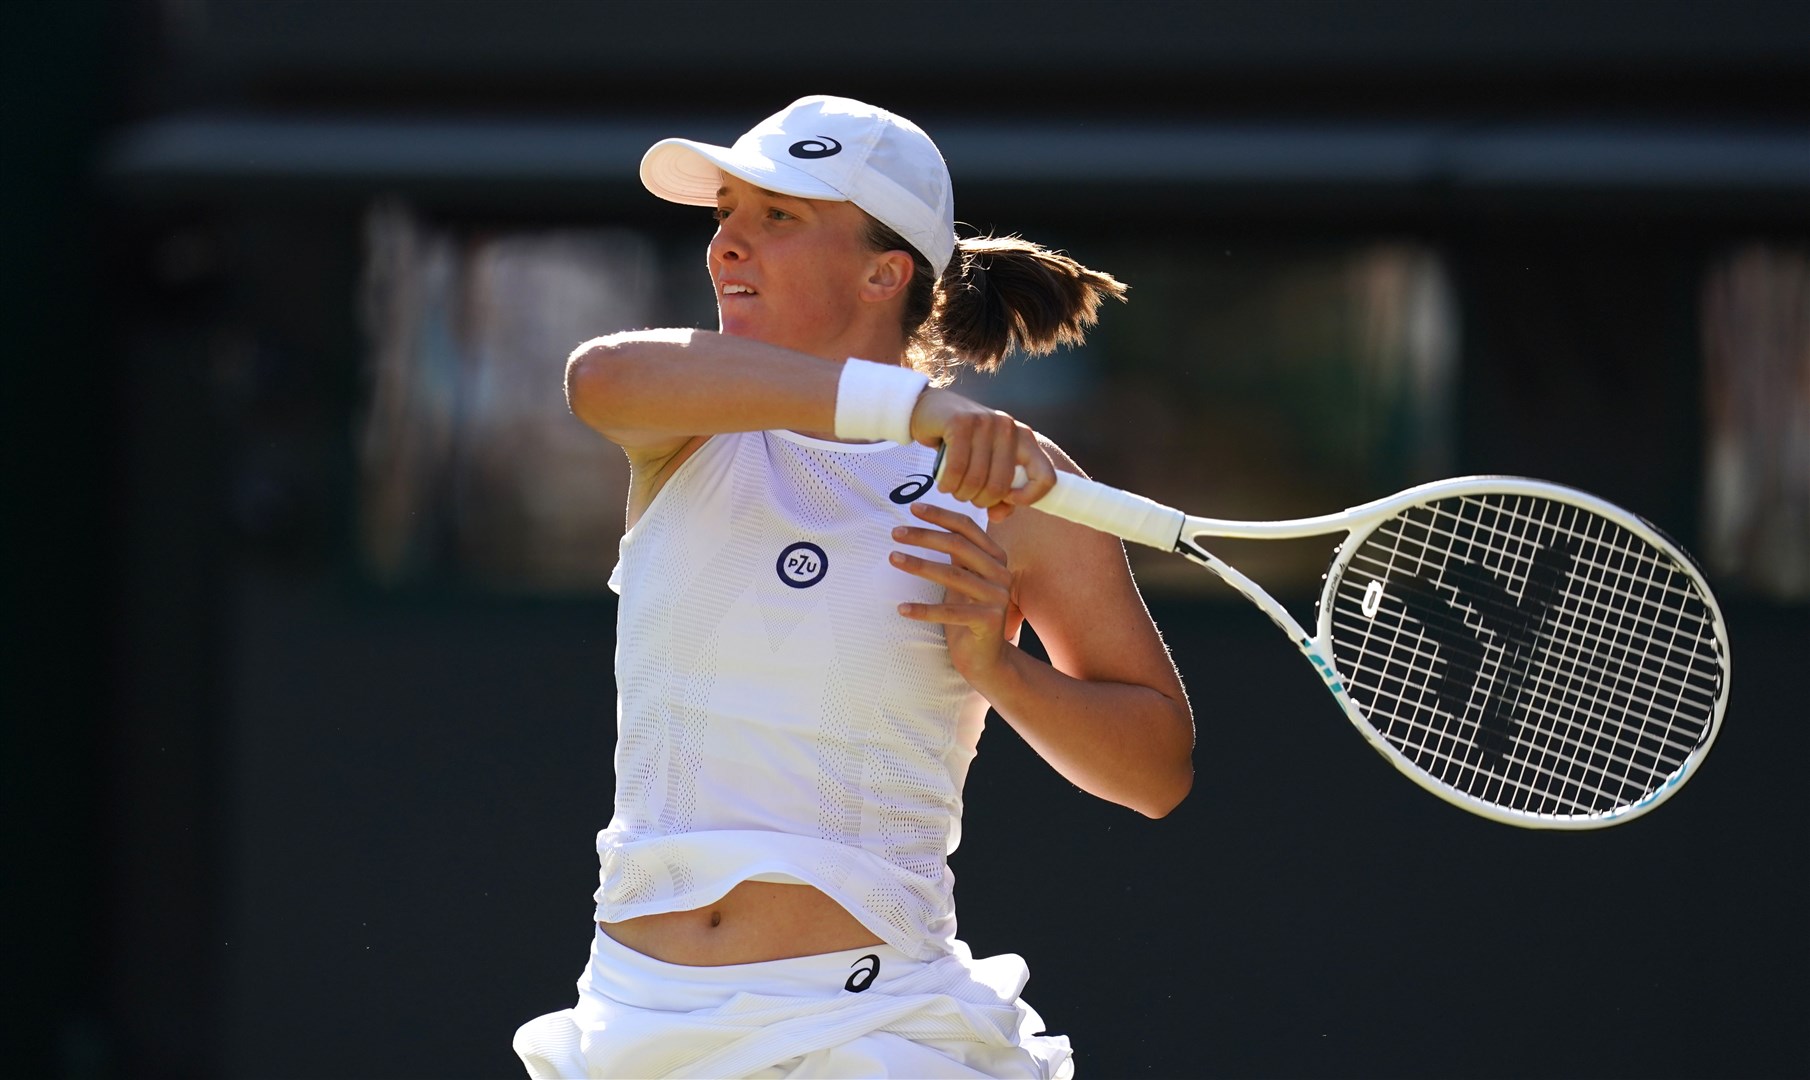 Iga Swiatek in action during her second round match against Lesley Pattinama Kerkhove during day four of the 2022 Wimbledon Championships (John Walton/PA)